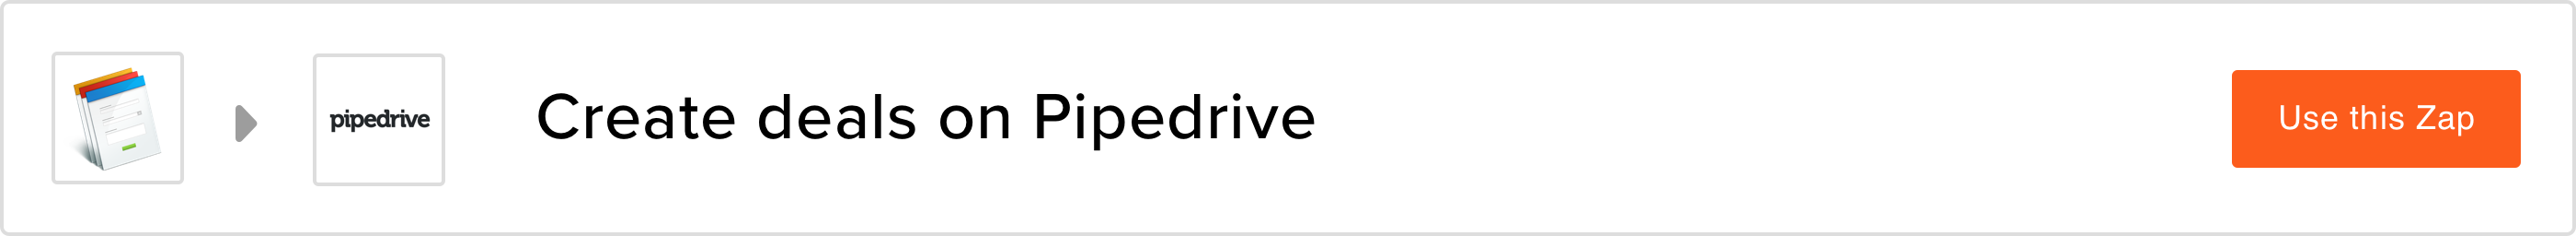 Create deals on Pipedrive